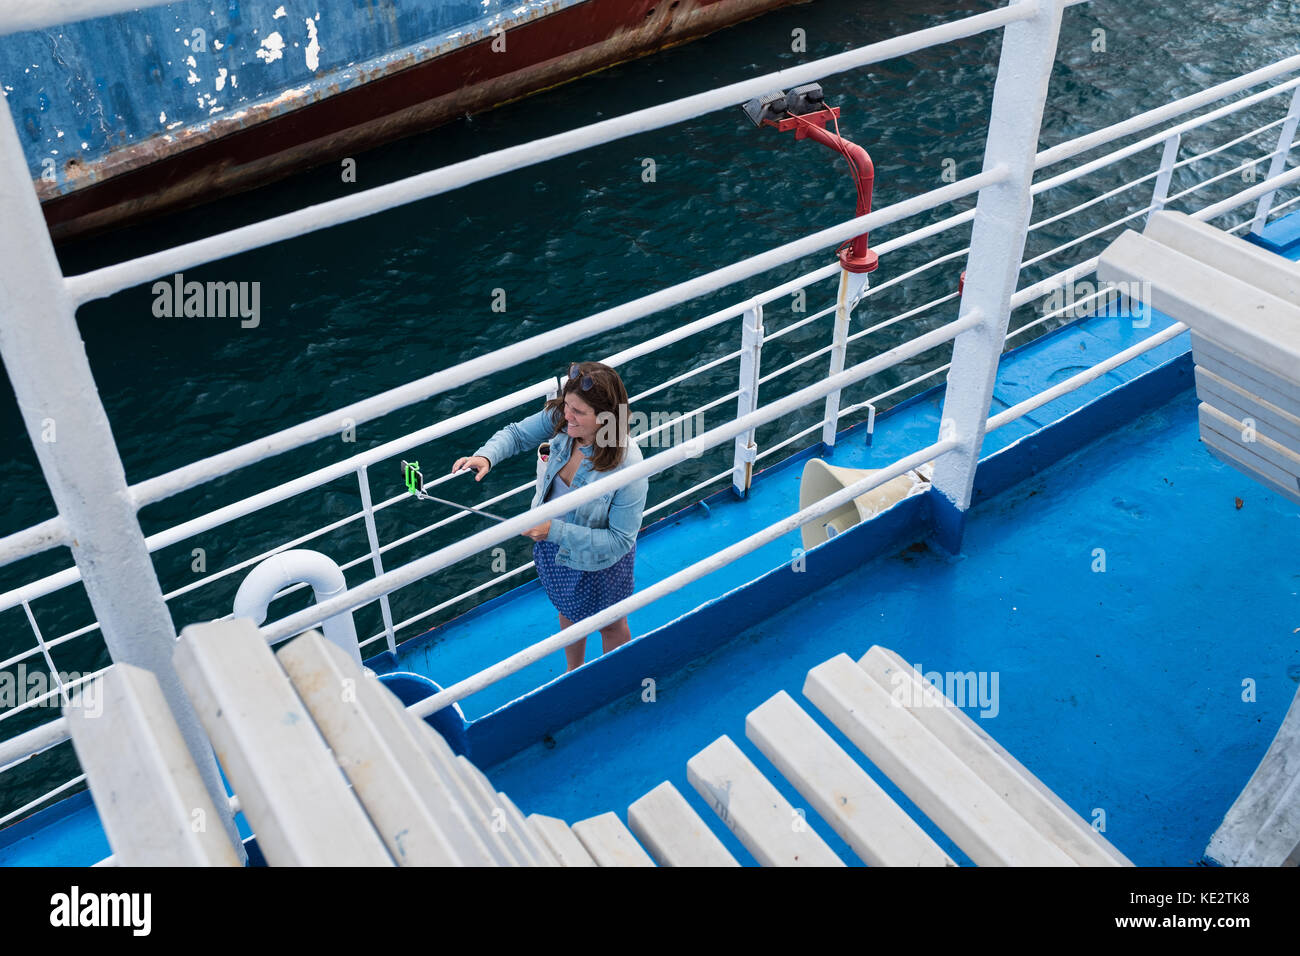 Woman taking a selfie photograph on board a ferry Stock Photo